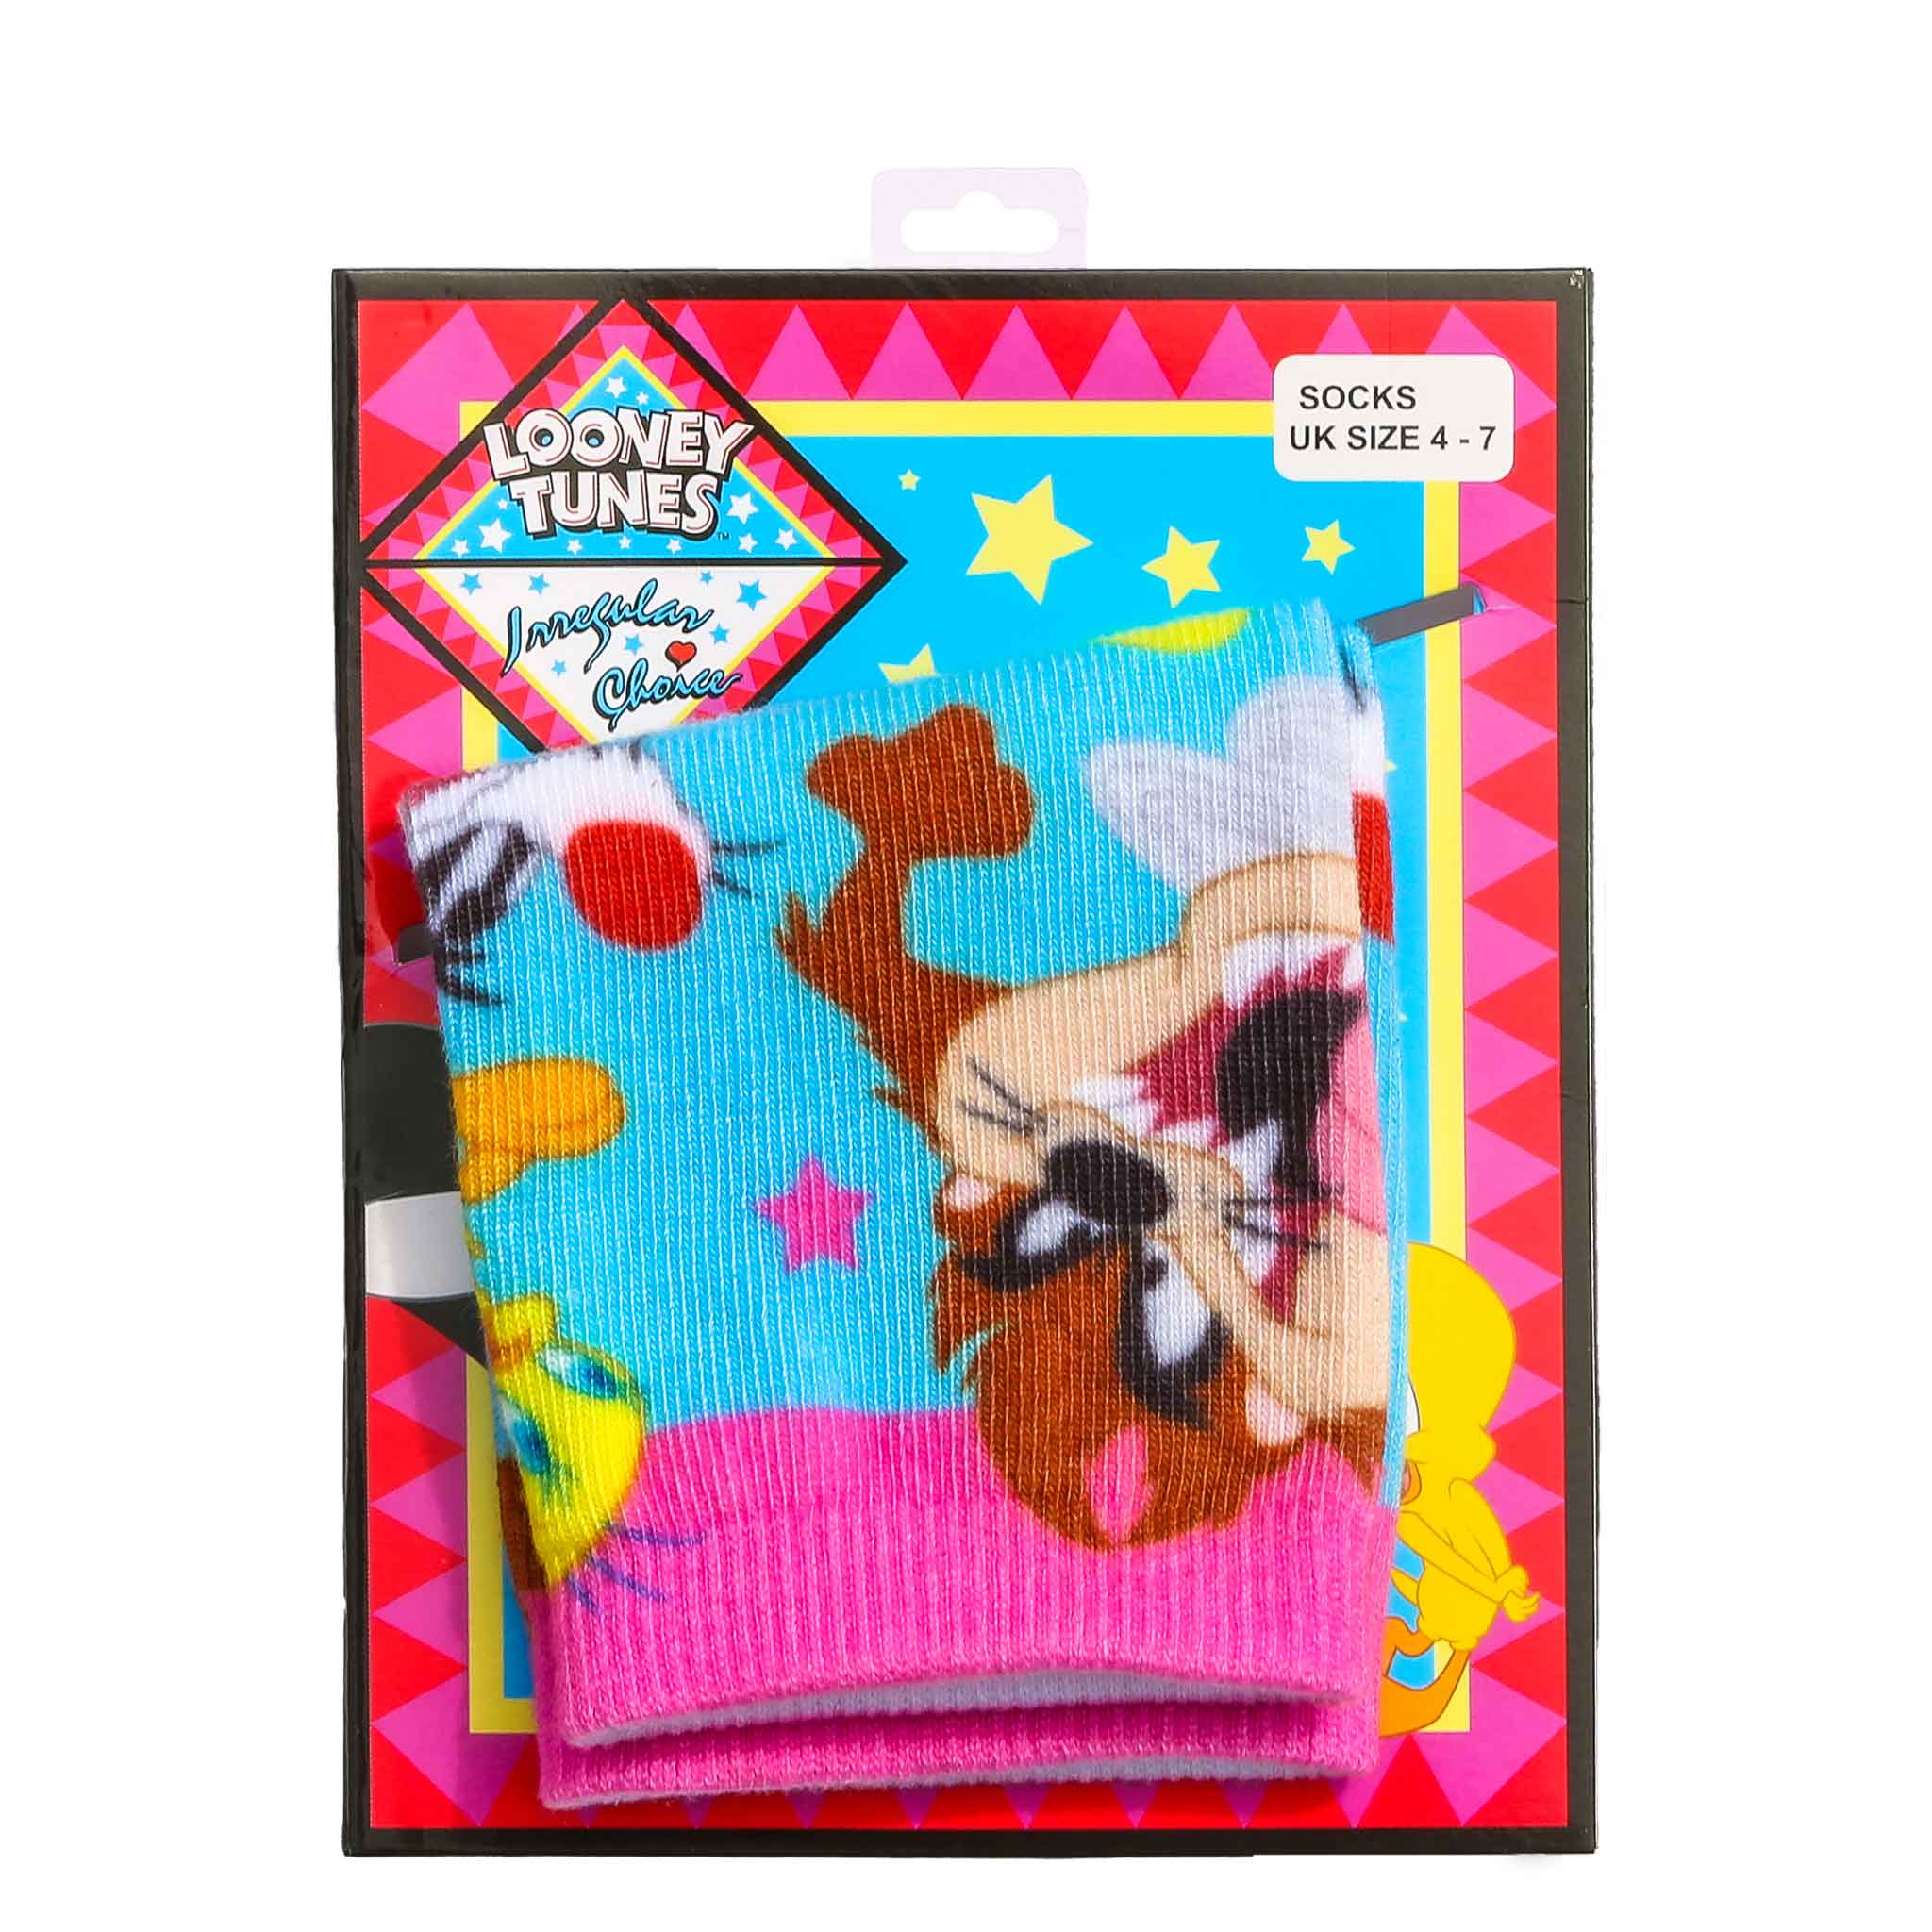 Bright blue socks with Looney Tunes characters Tweety Bird, Taz of Tasmania, Sylvester the Cat, Daffy Duck, and Bugs Bunny who are surrounded with pink stars and matching ankle band are pictured in their packet.